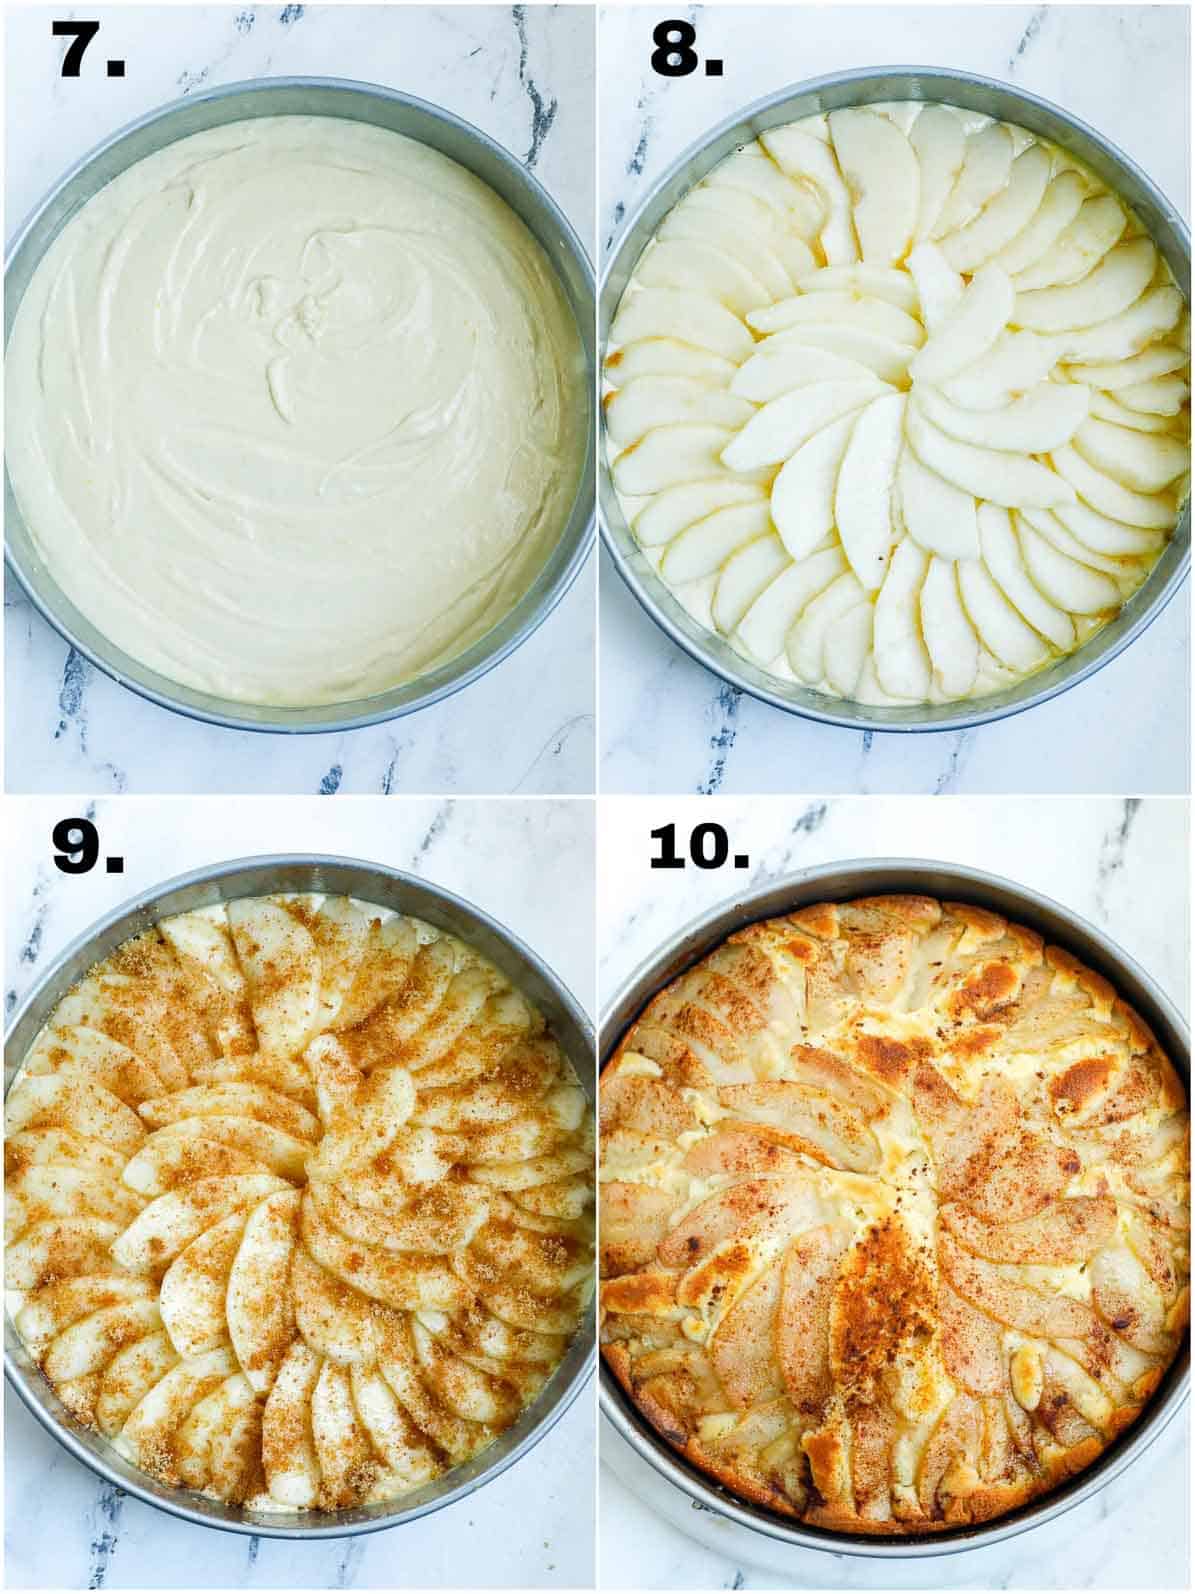 steps showing pear cake in a pan, before and after adding pears, then after baking.